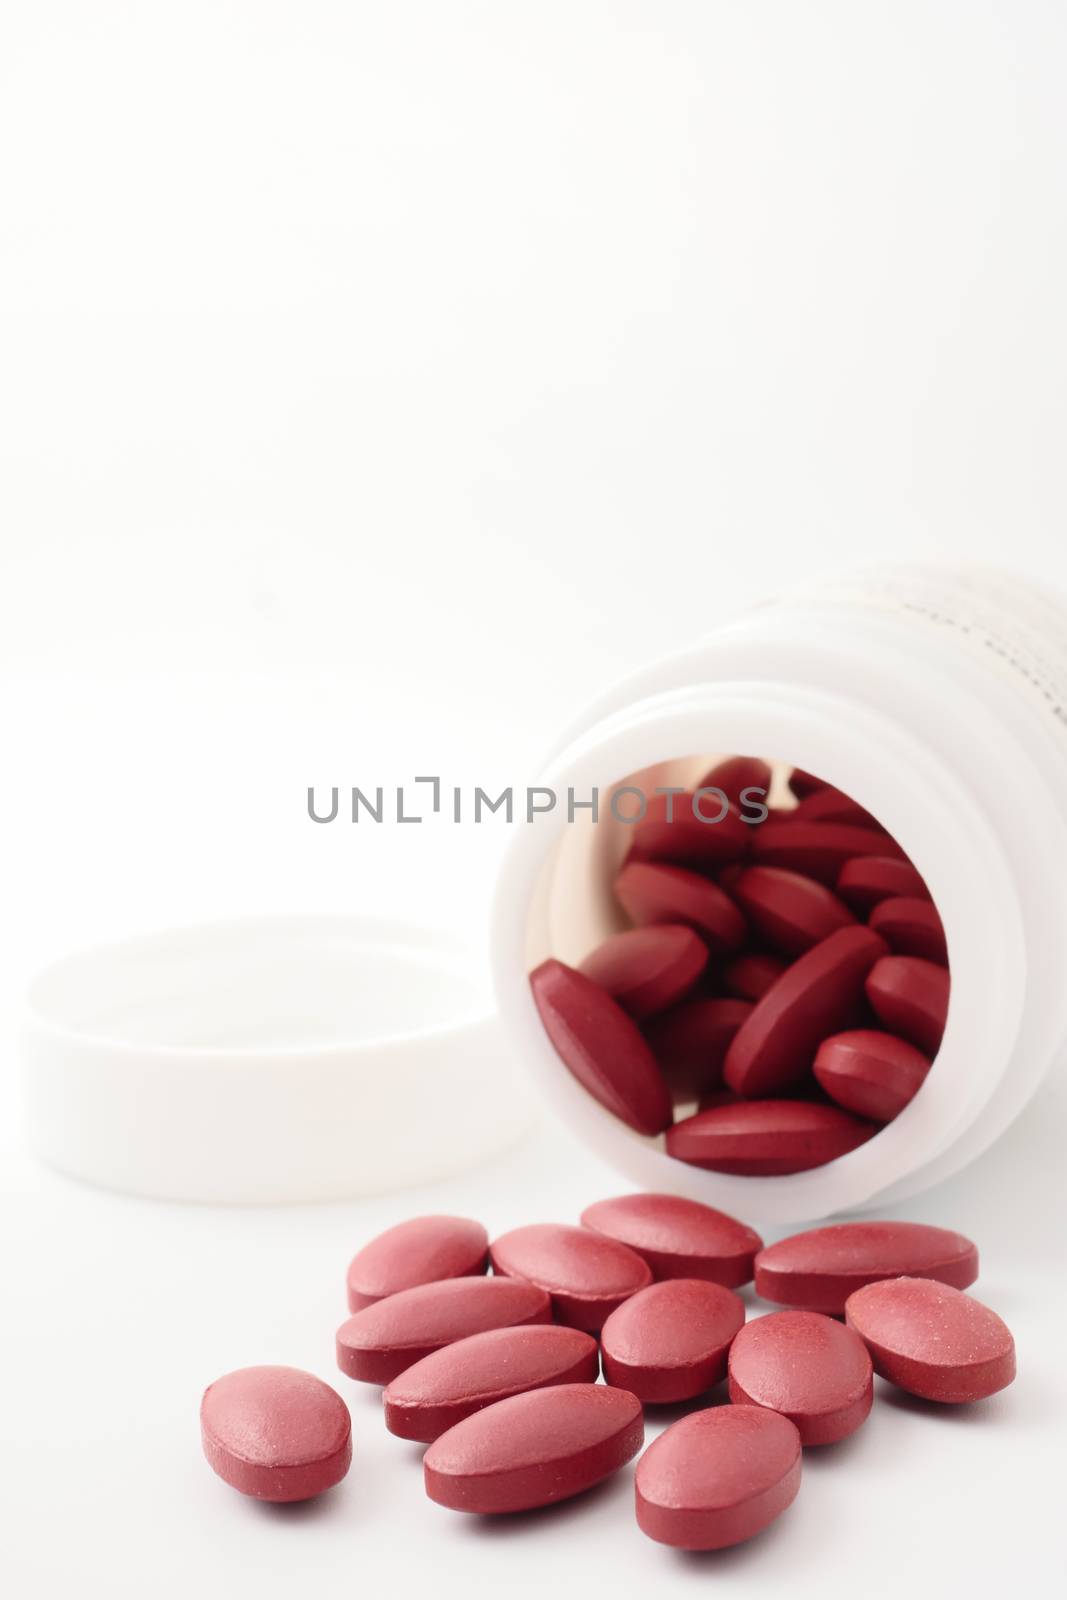 Red vitamin pills pouring out of the bottle on white background.